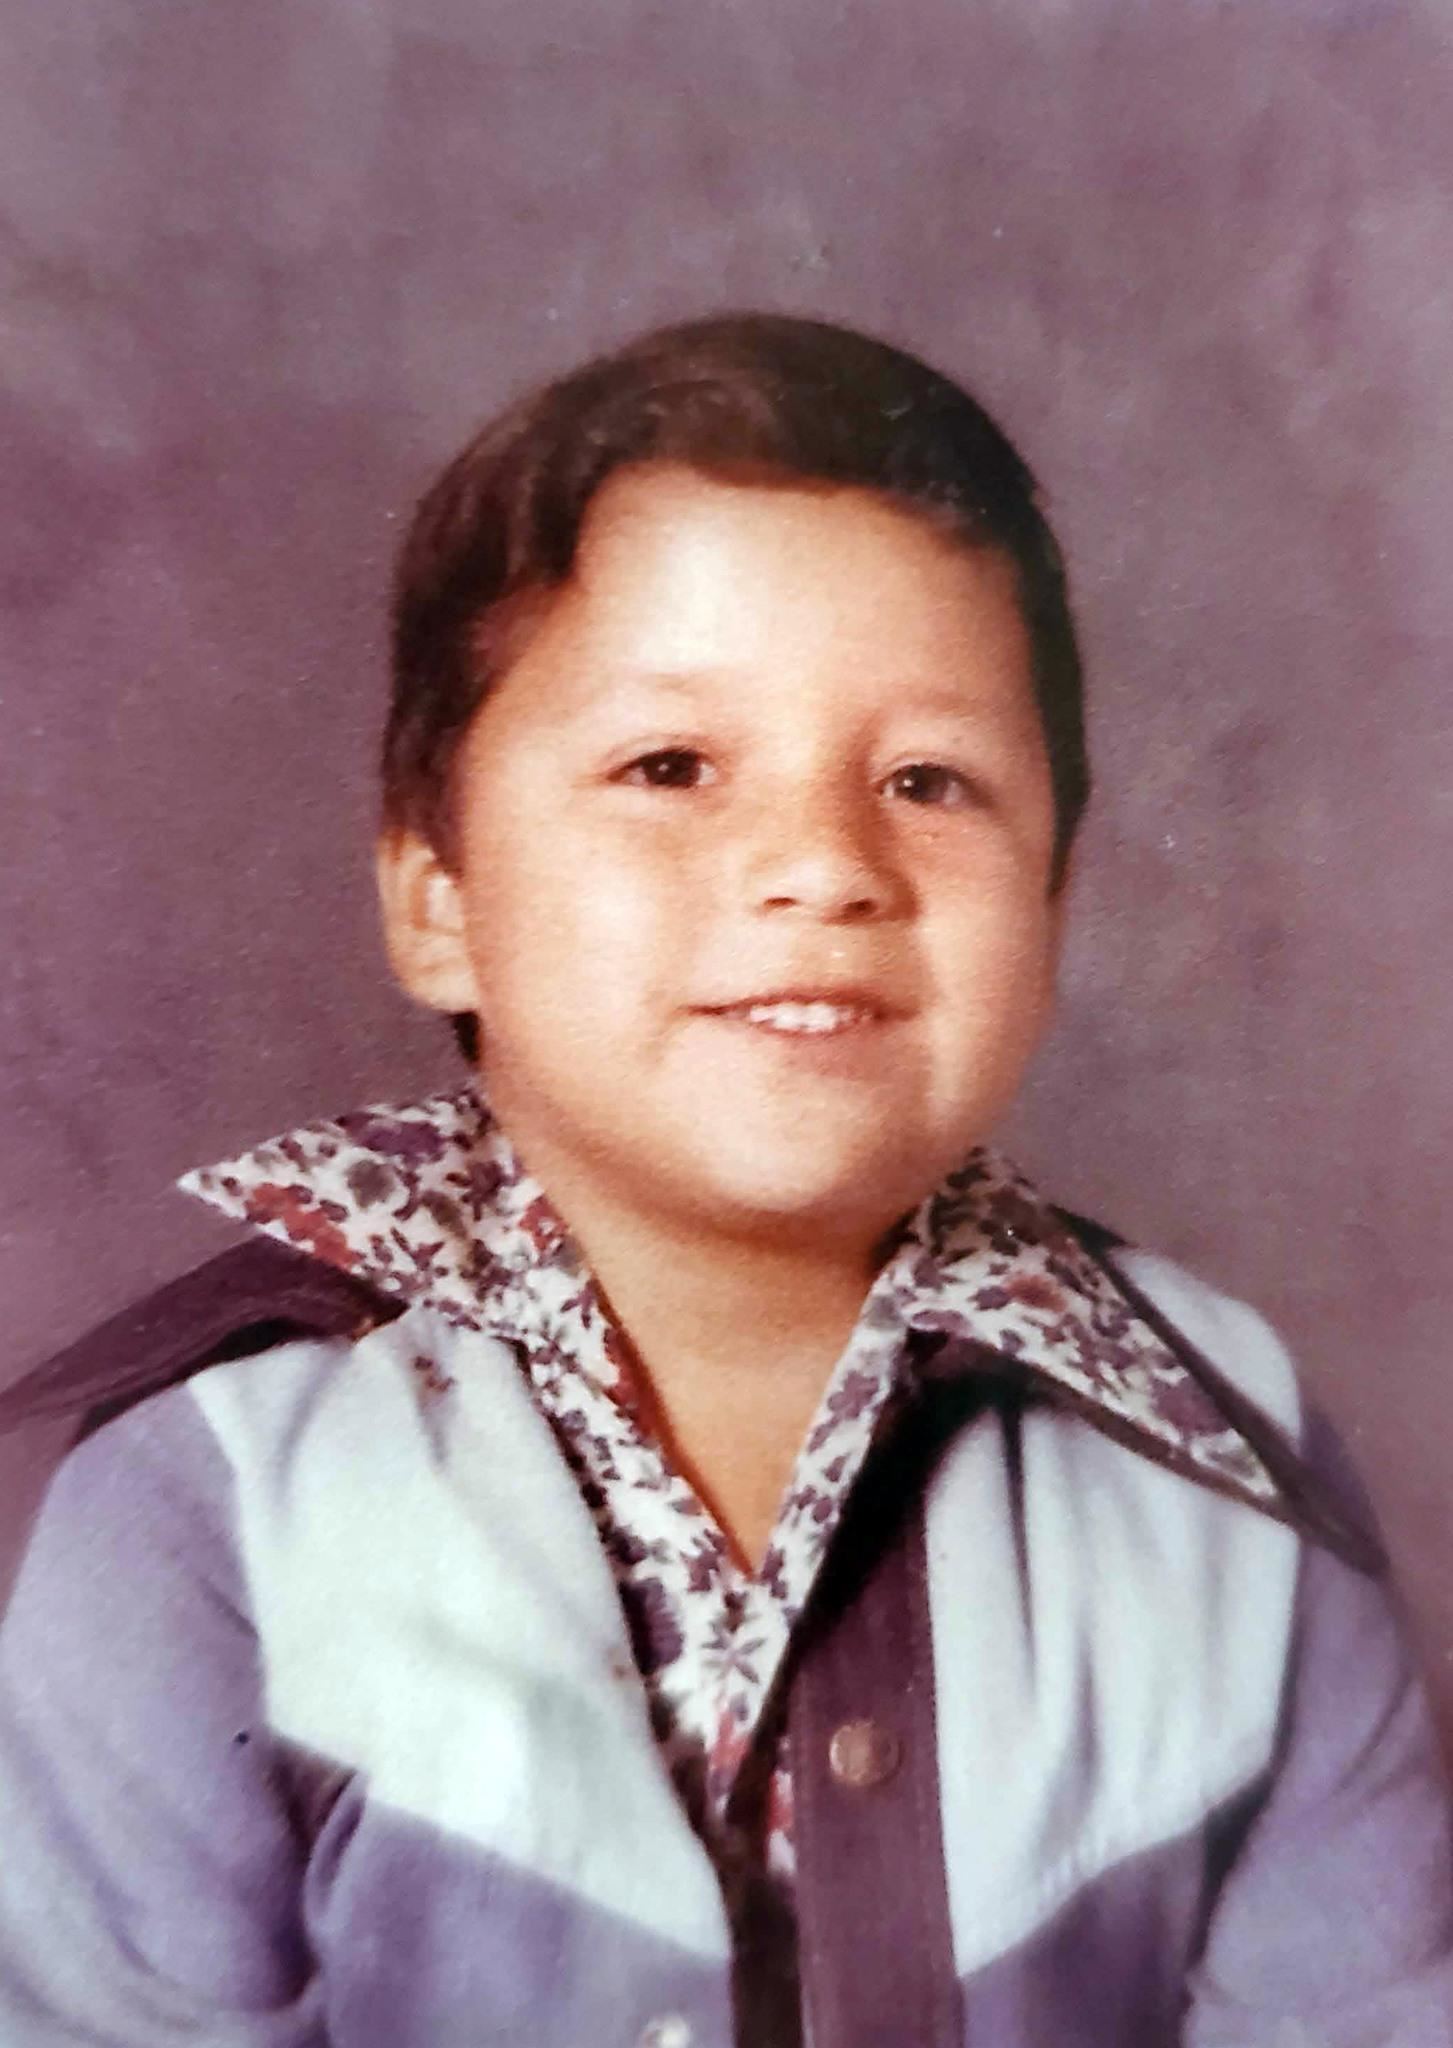 Ralph Vallejo as a child